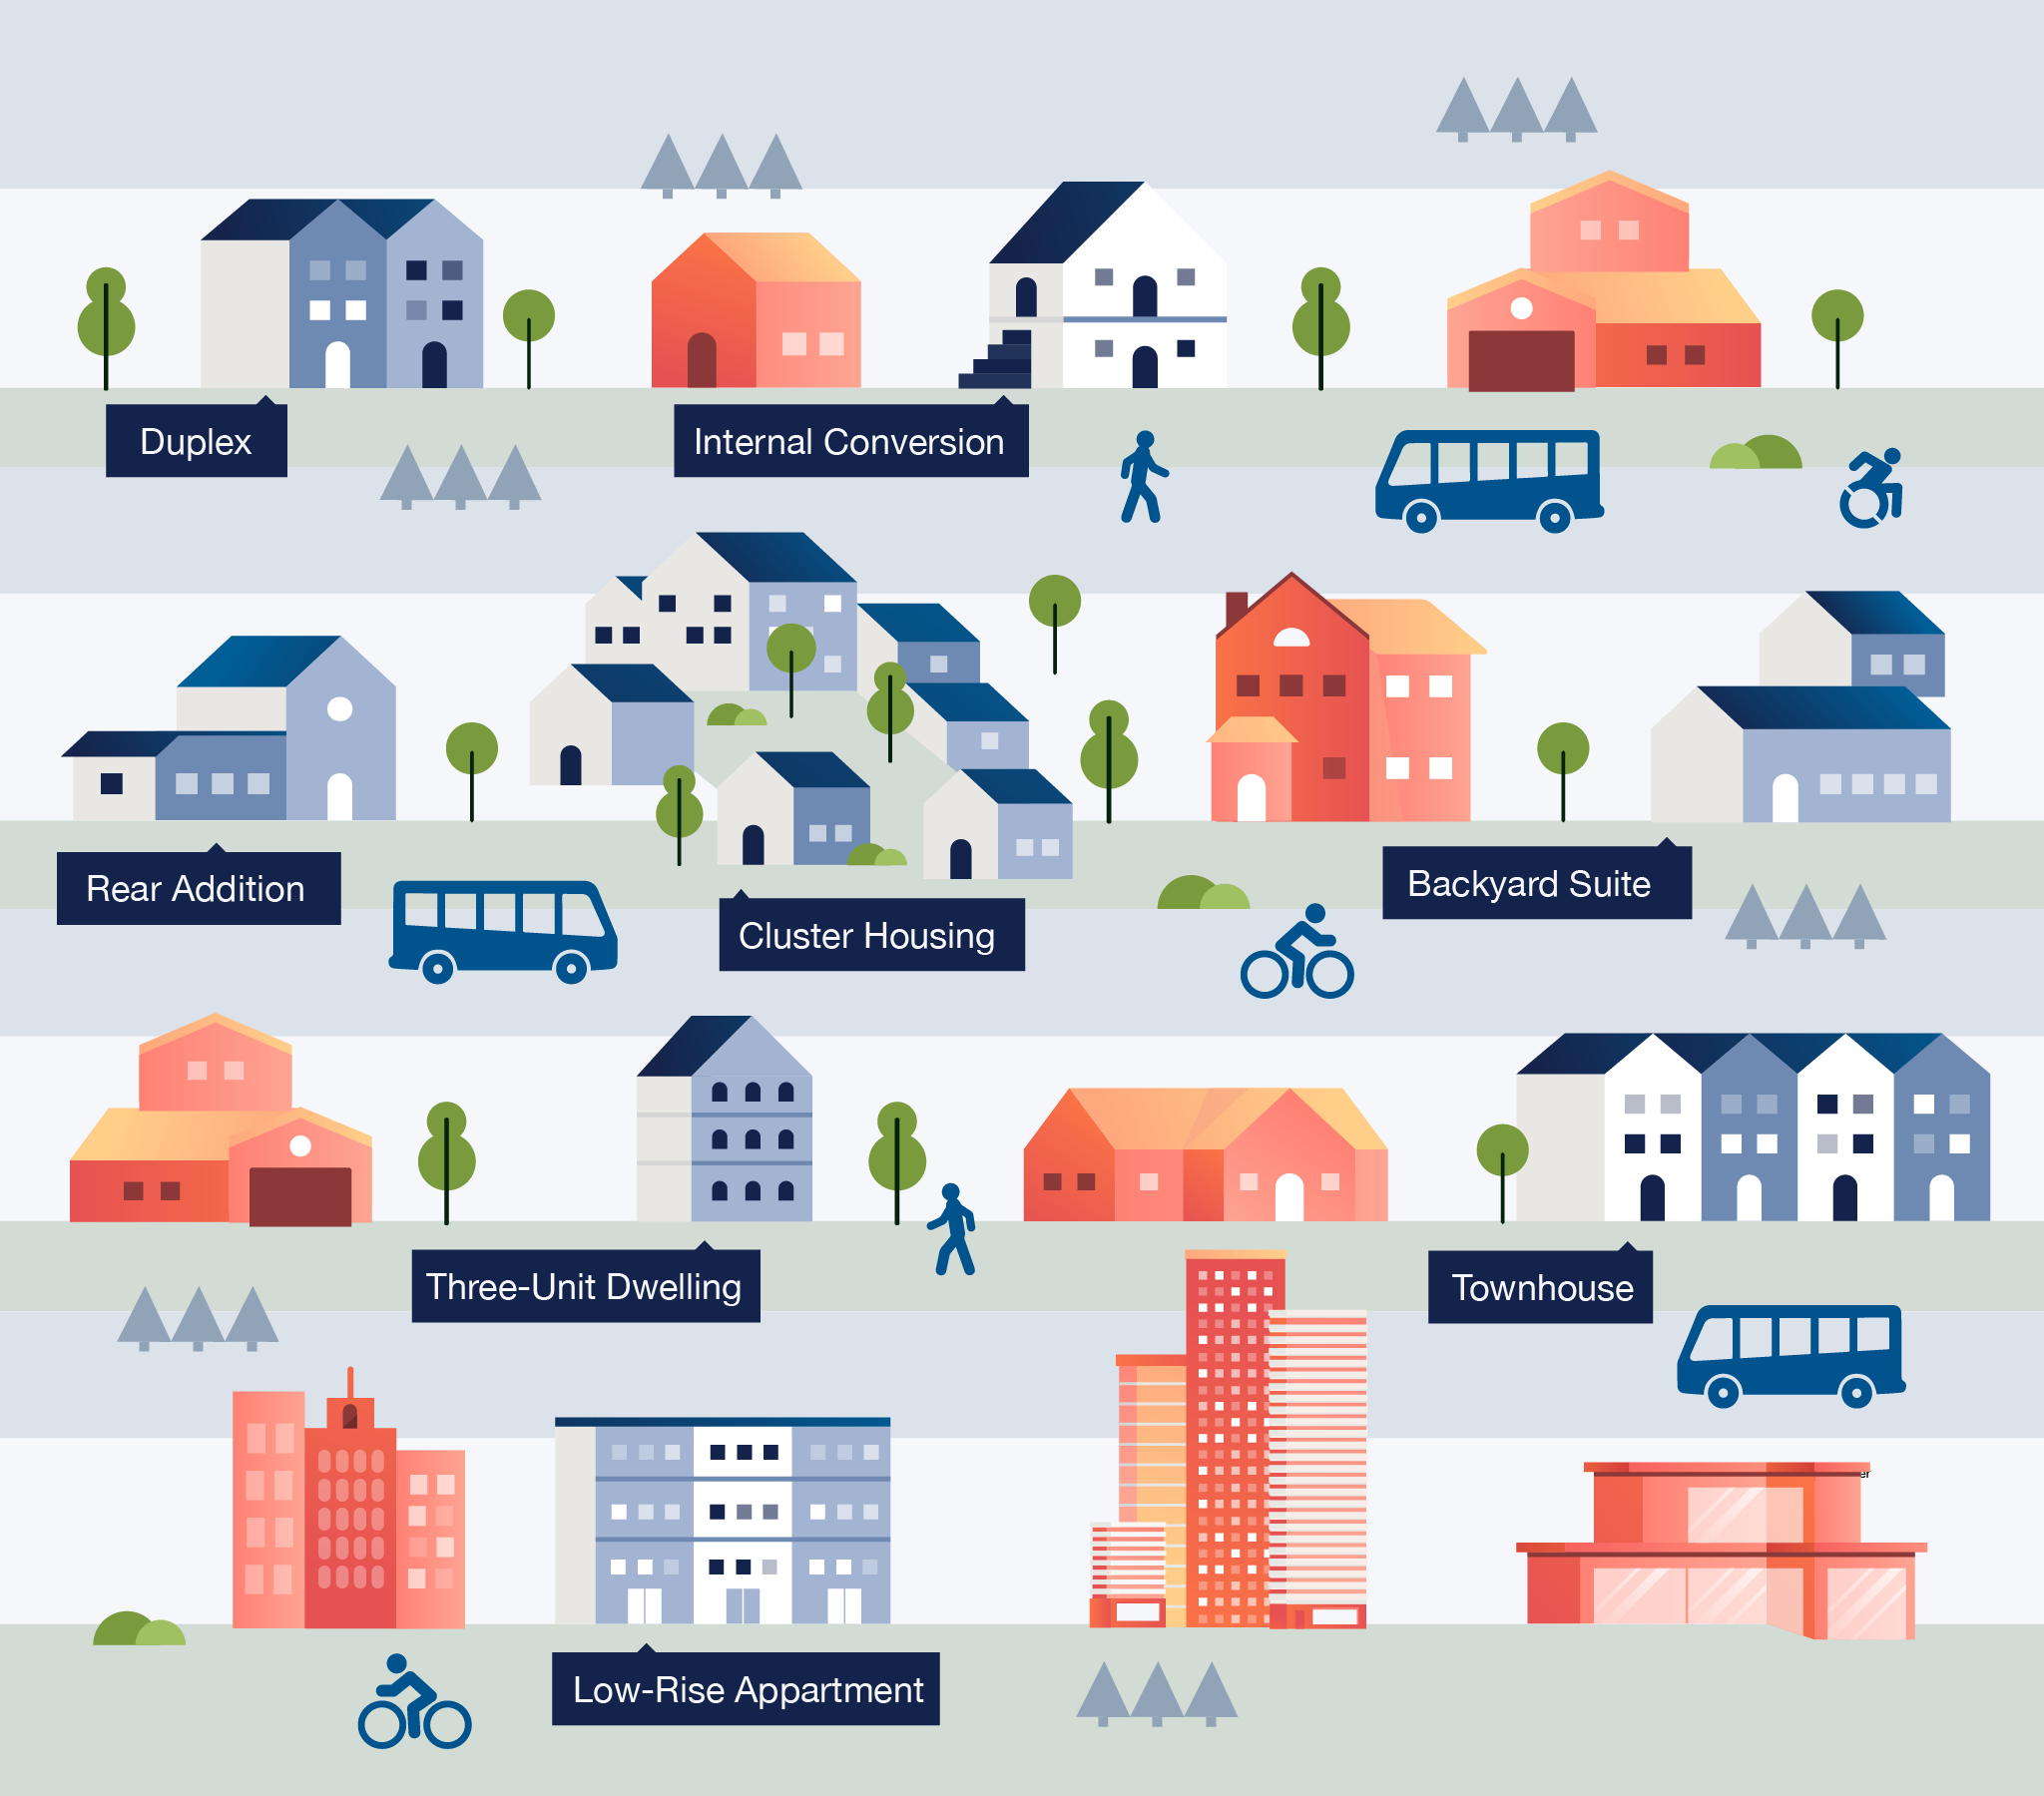 A graphic of various types of missing middle housing represented as colourful icons